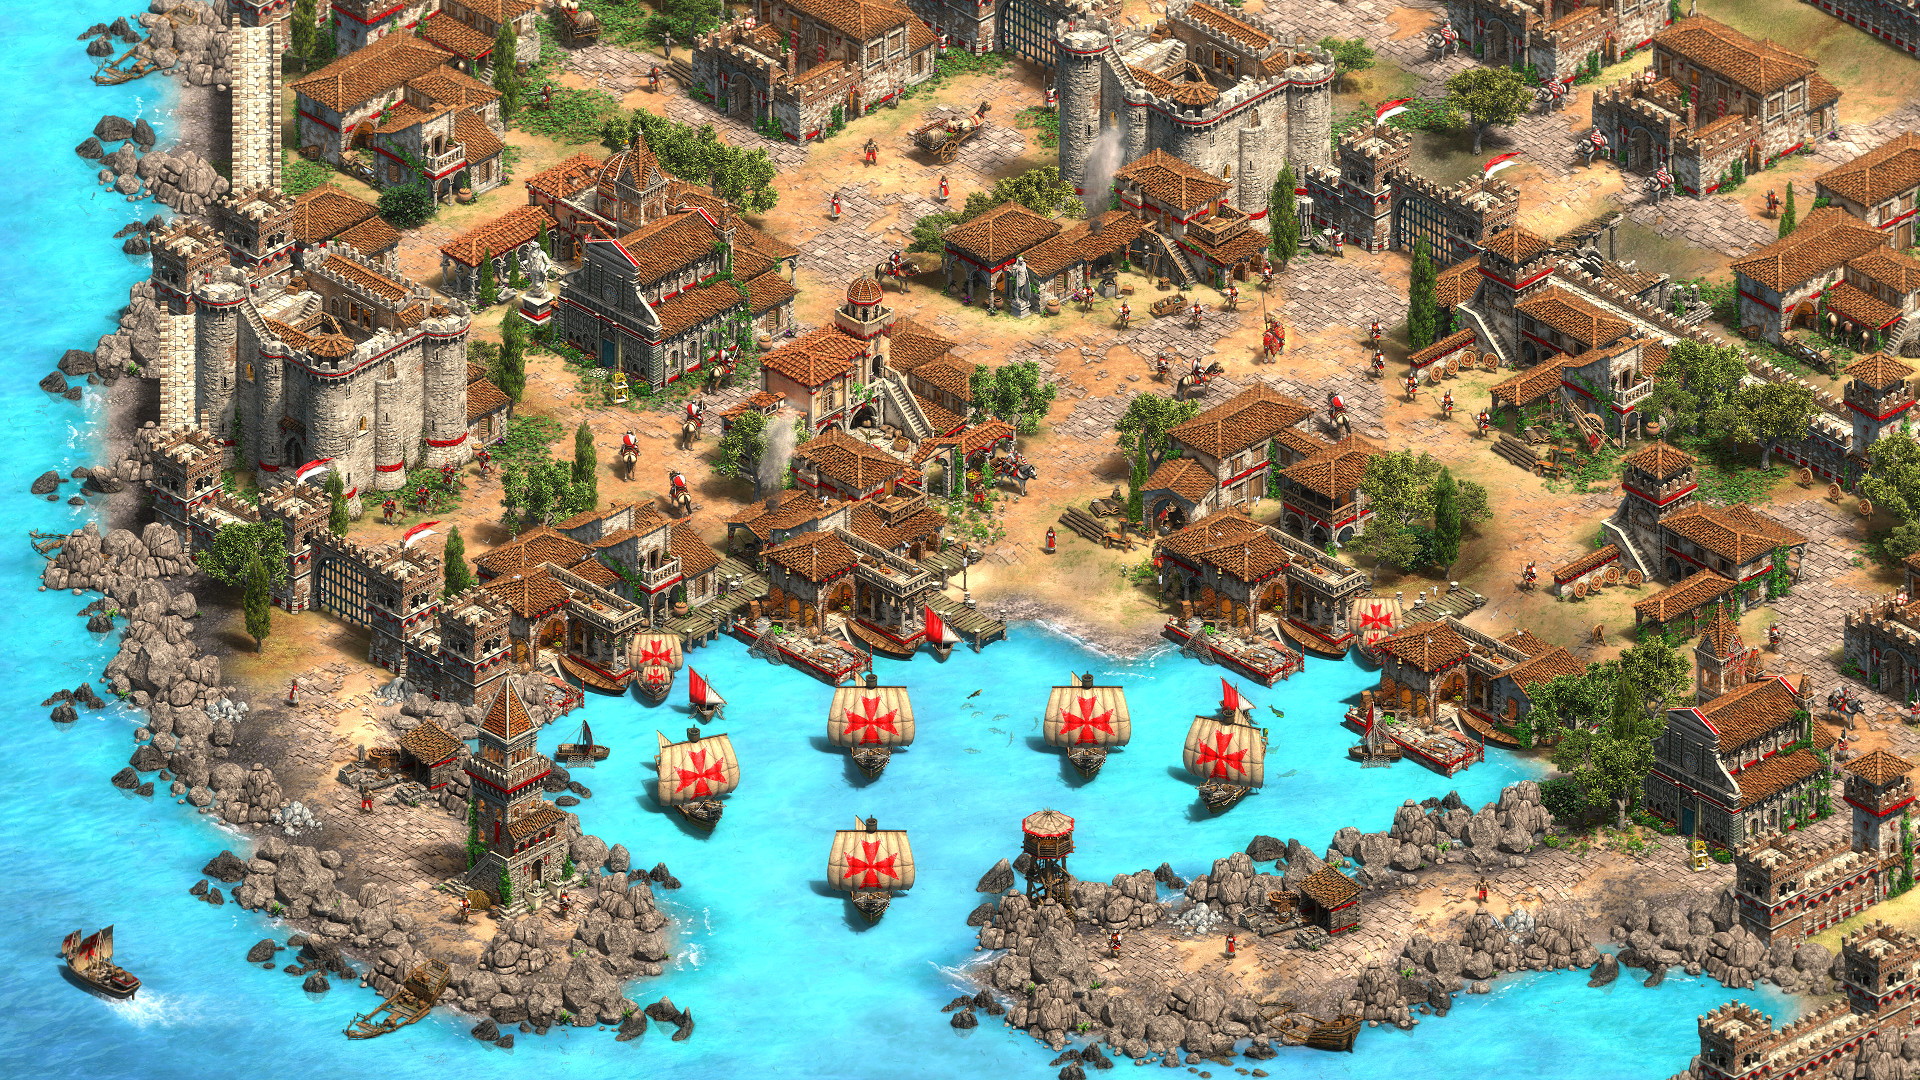 Age of Empires II: Definitive Edition - Lords of the West - screenshot 2